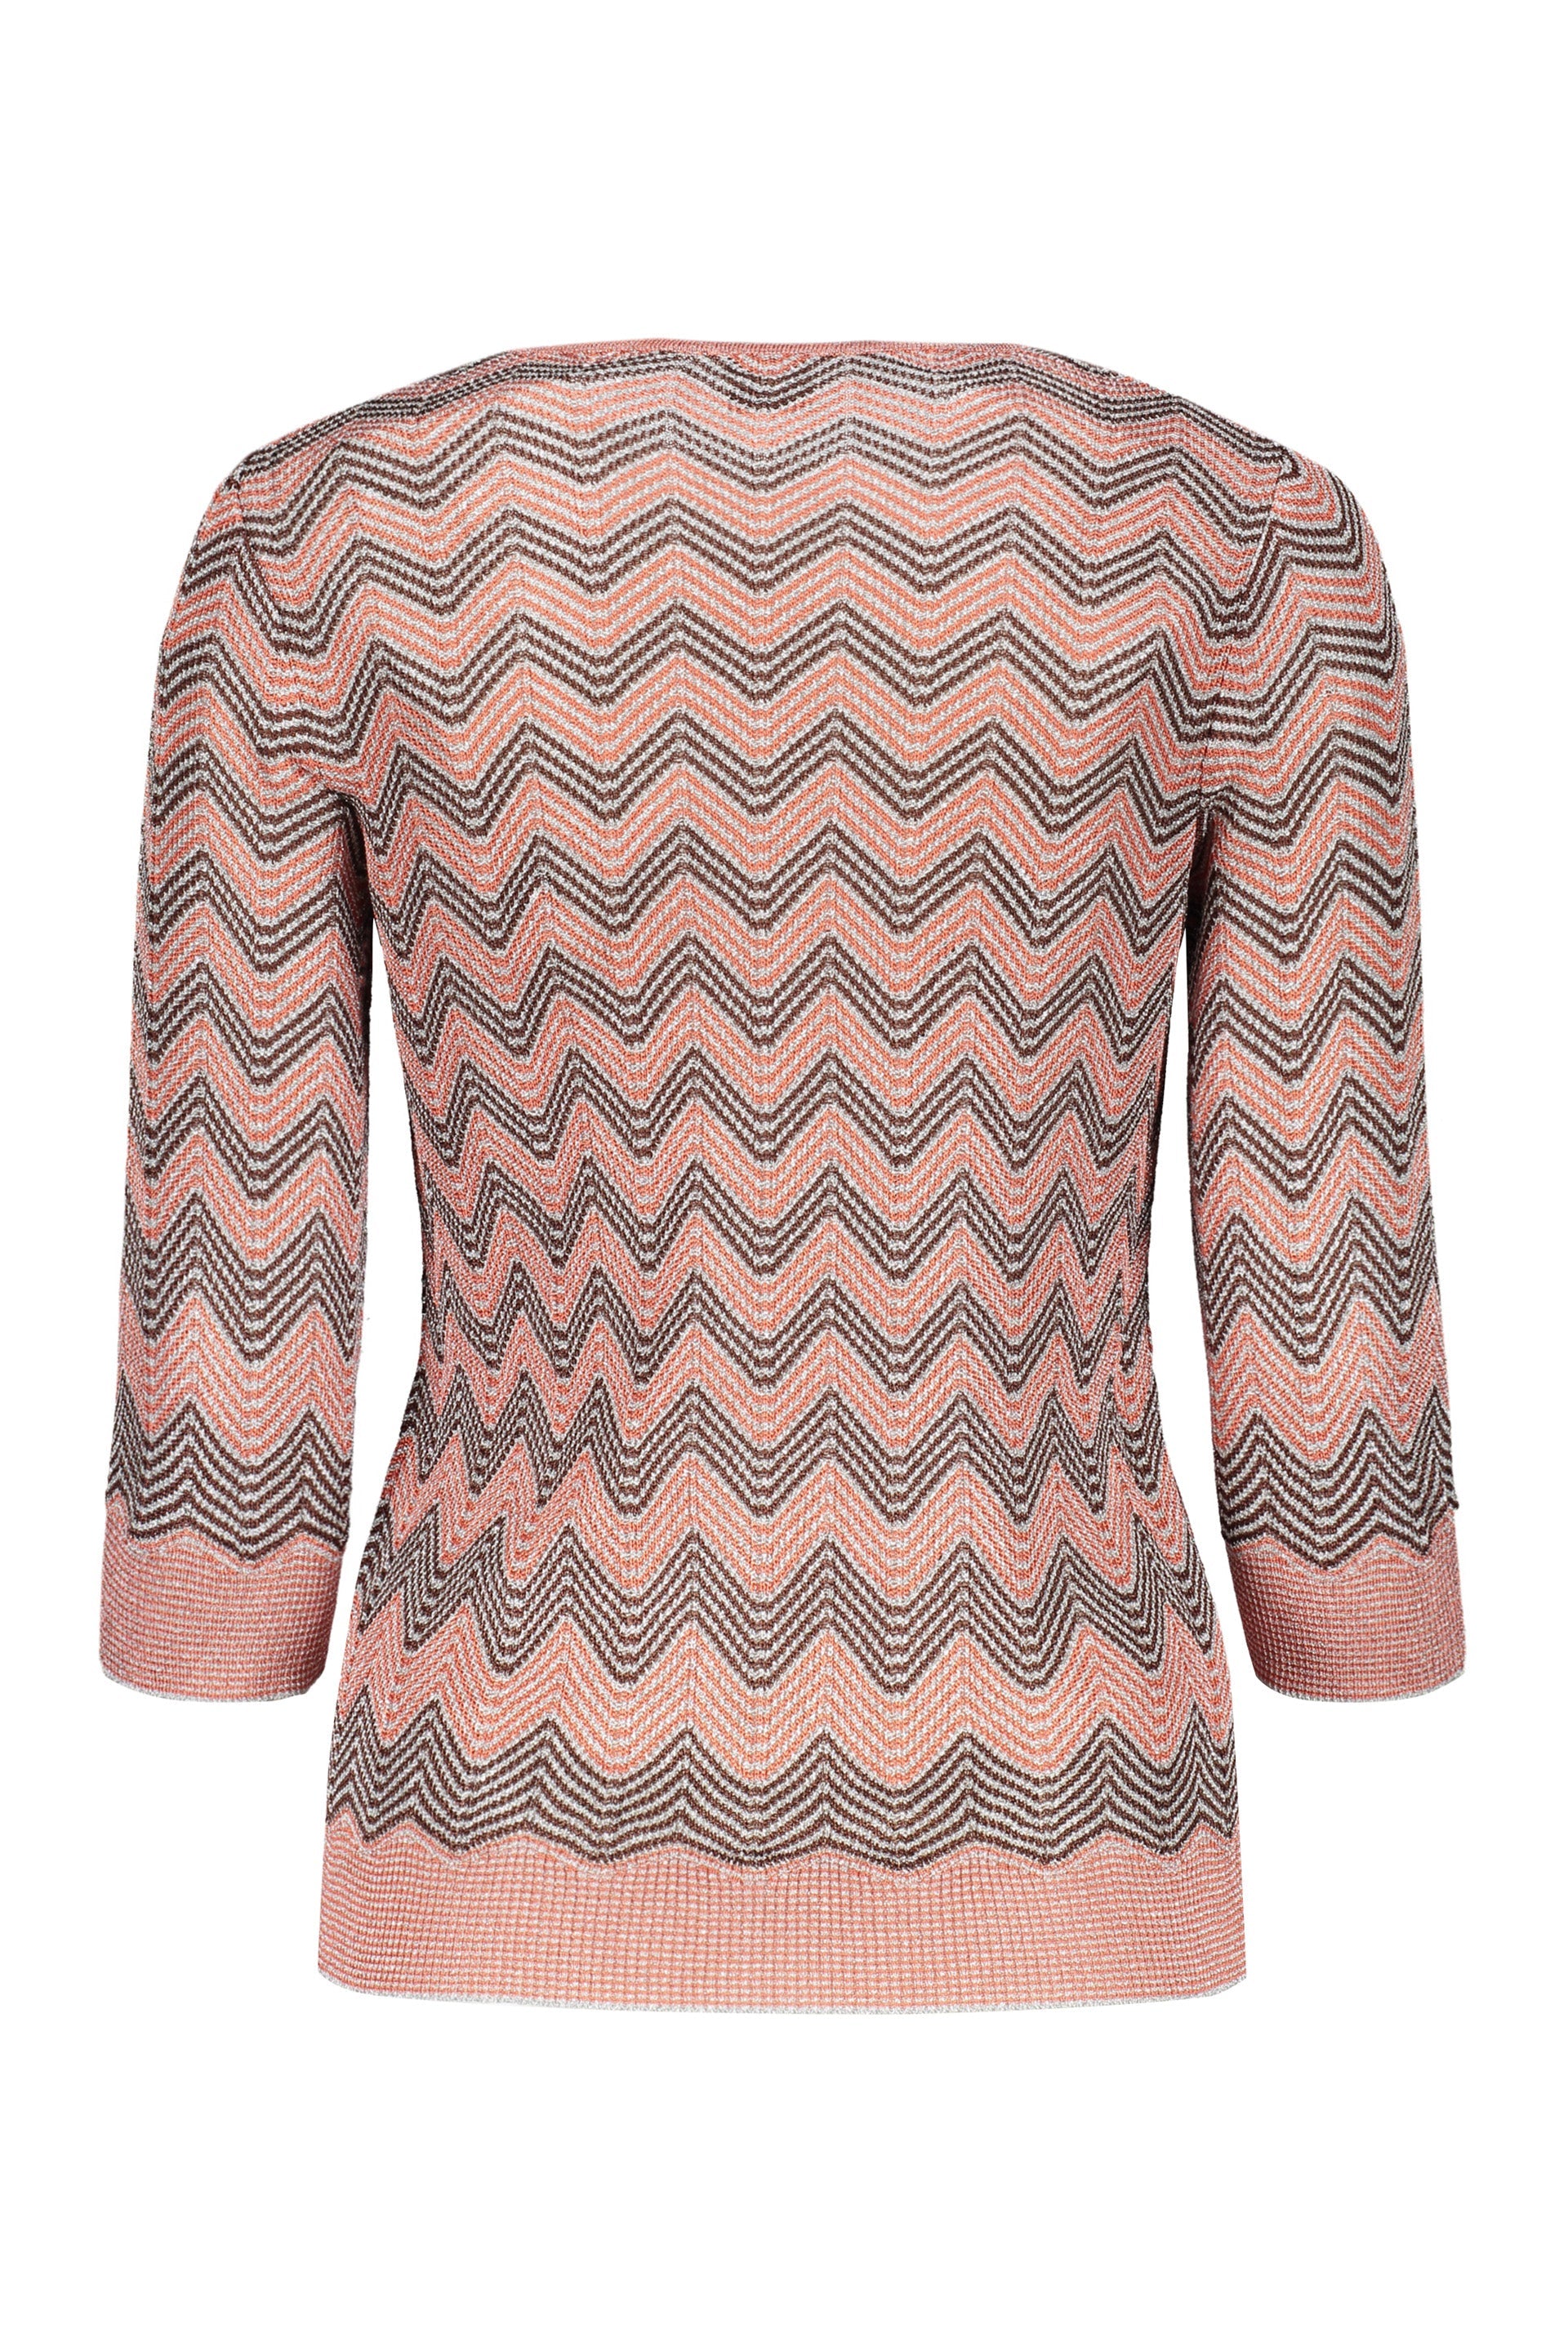 Missoni-OUTLET-SALE-Knitted-top-Shirts-ARCHIVE-COLLECTION-2_8d27e5c2-a067-4a72-a874-5f92dc818ebb.jpg